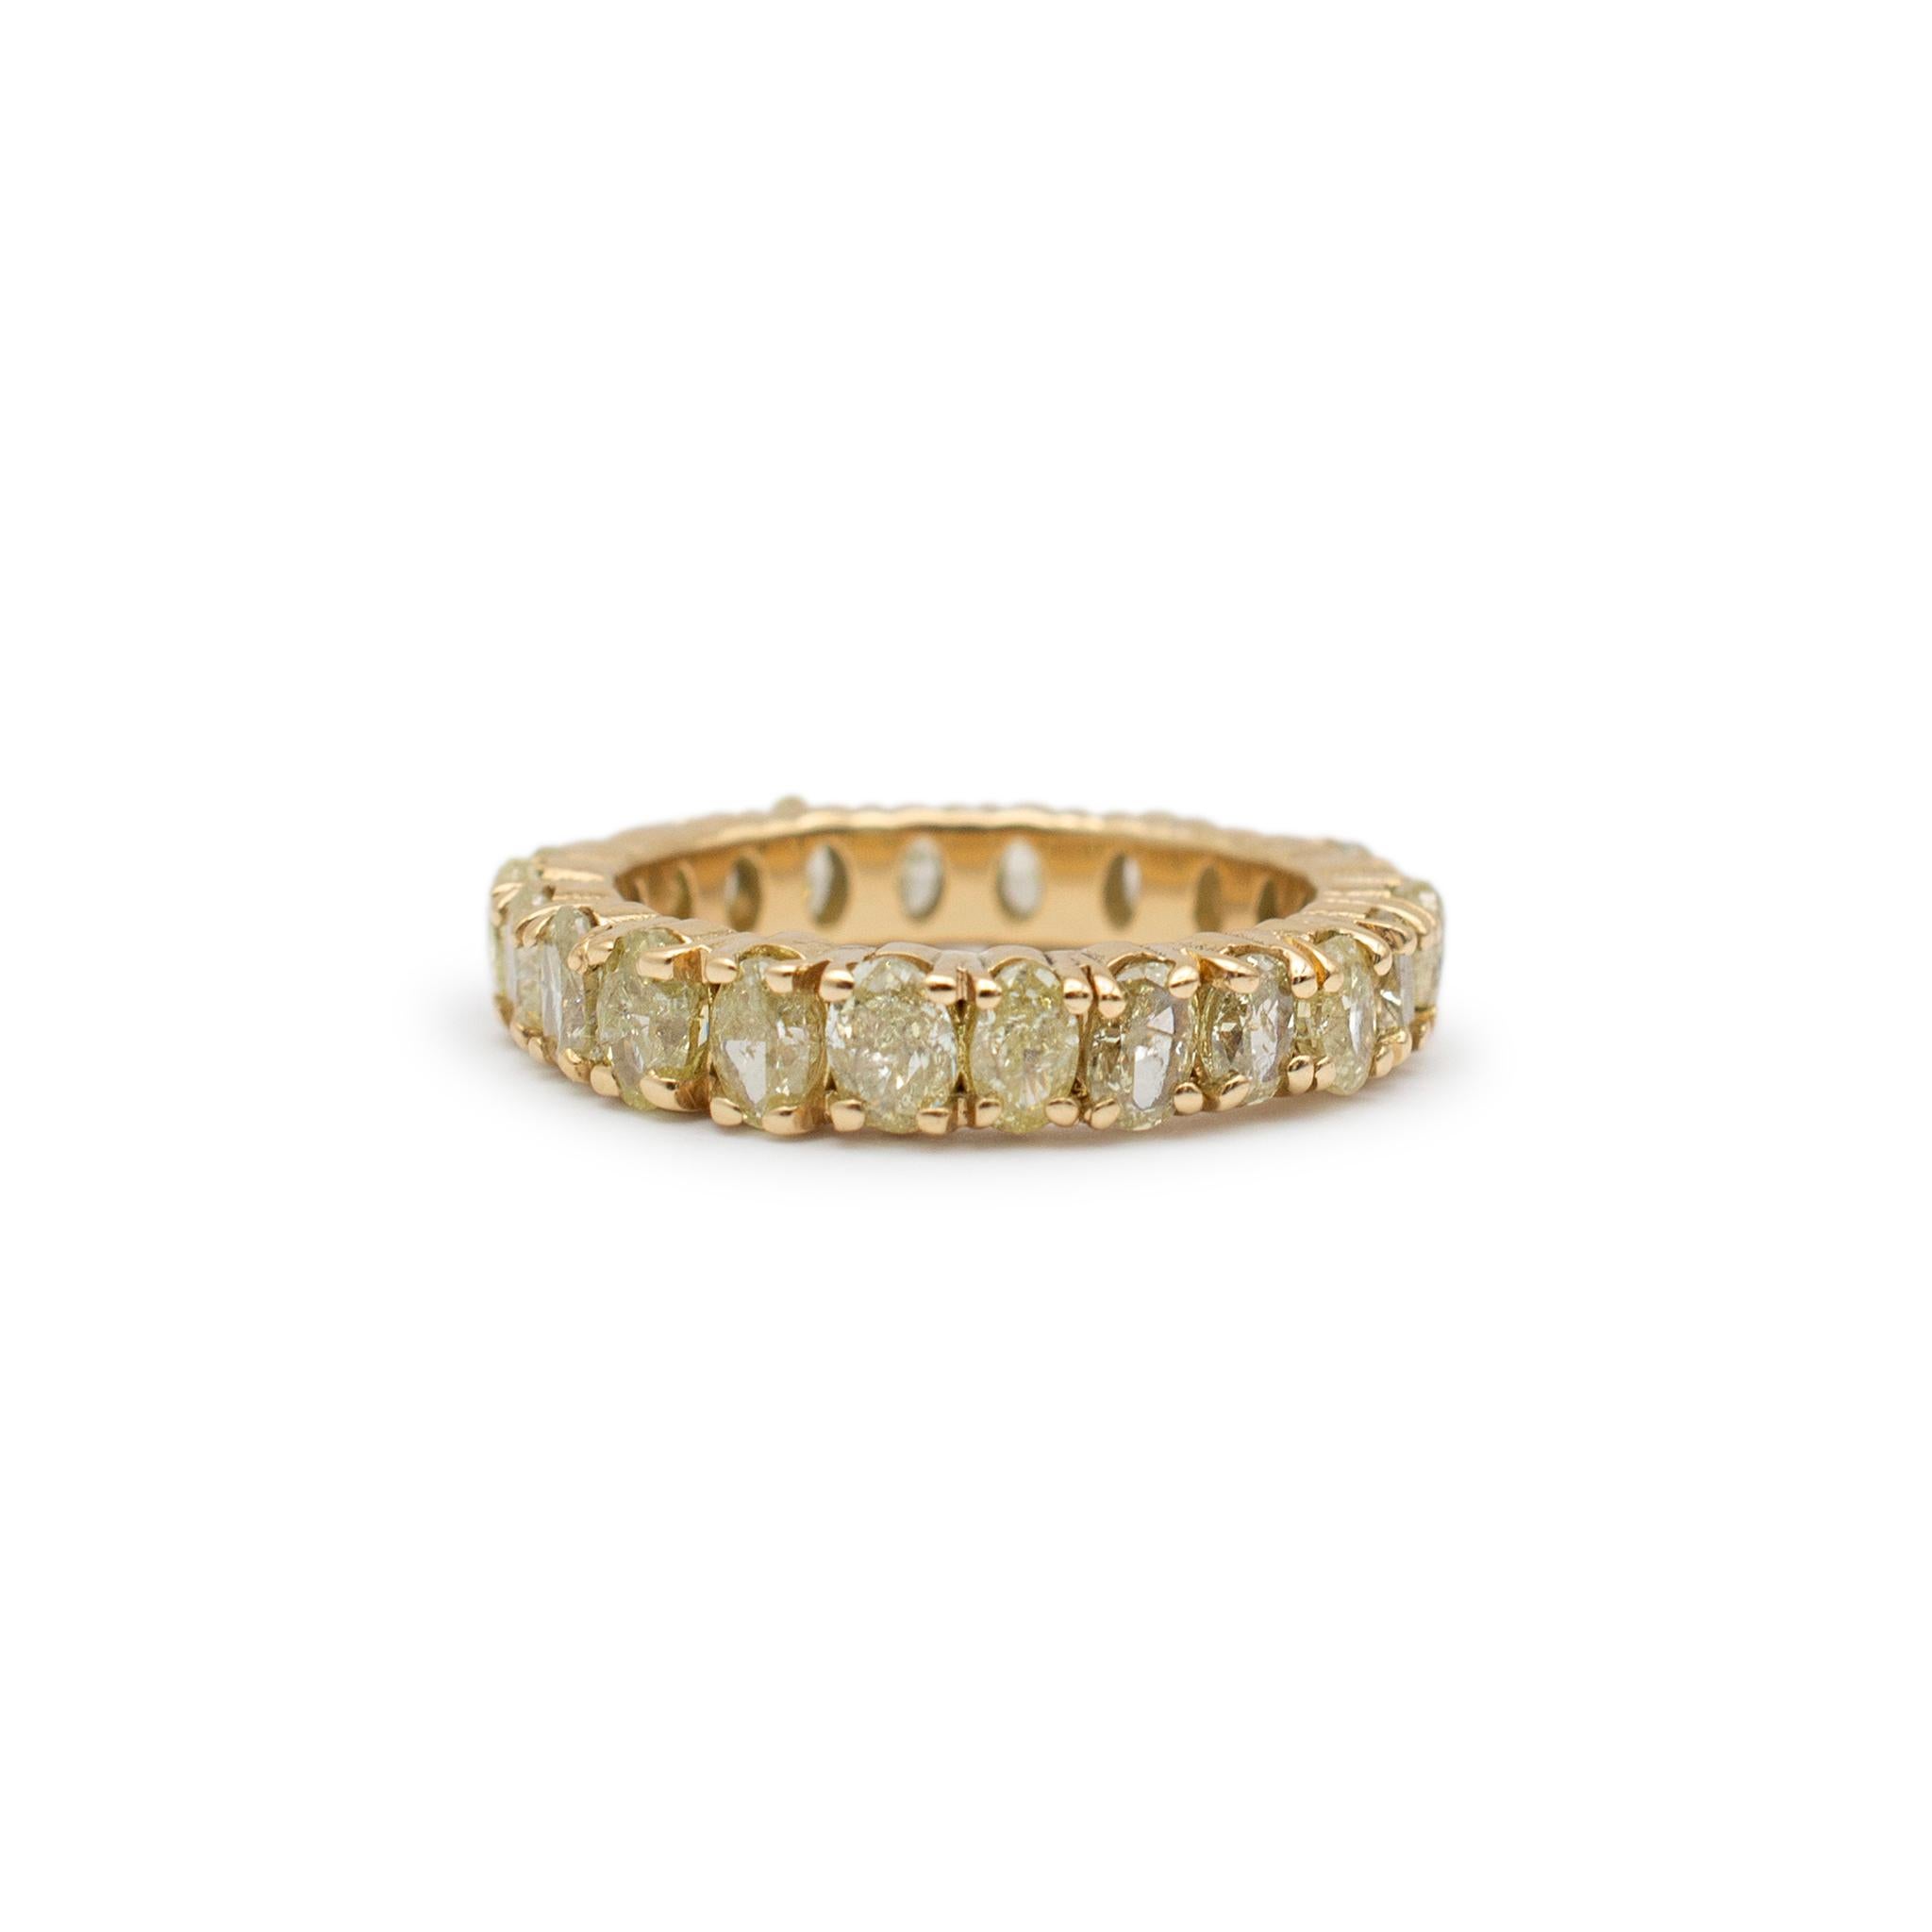 Gender: Ladies

Metal Type: 18K Yellow Gold

Ring Size: 6

Width: 4.00 mm

Weight: 5.95 grams
One ladies 18K Yellow Gold oval diamond wedding band. The metal was tested and determined to be 18K yellow gold. In excellent condition.

Pre-owned. Might